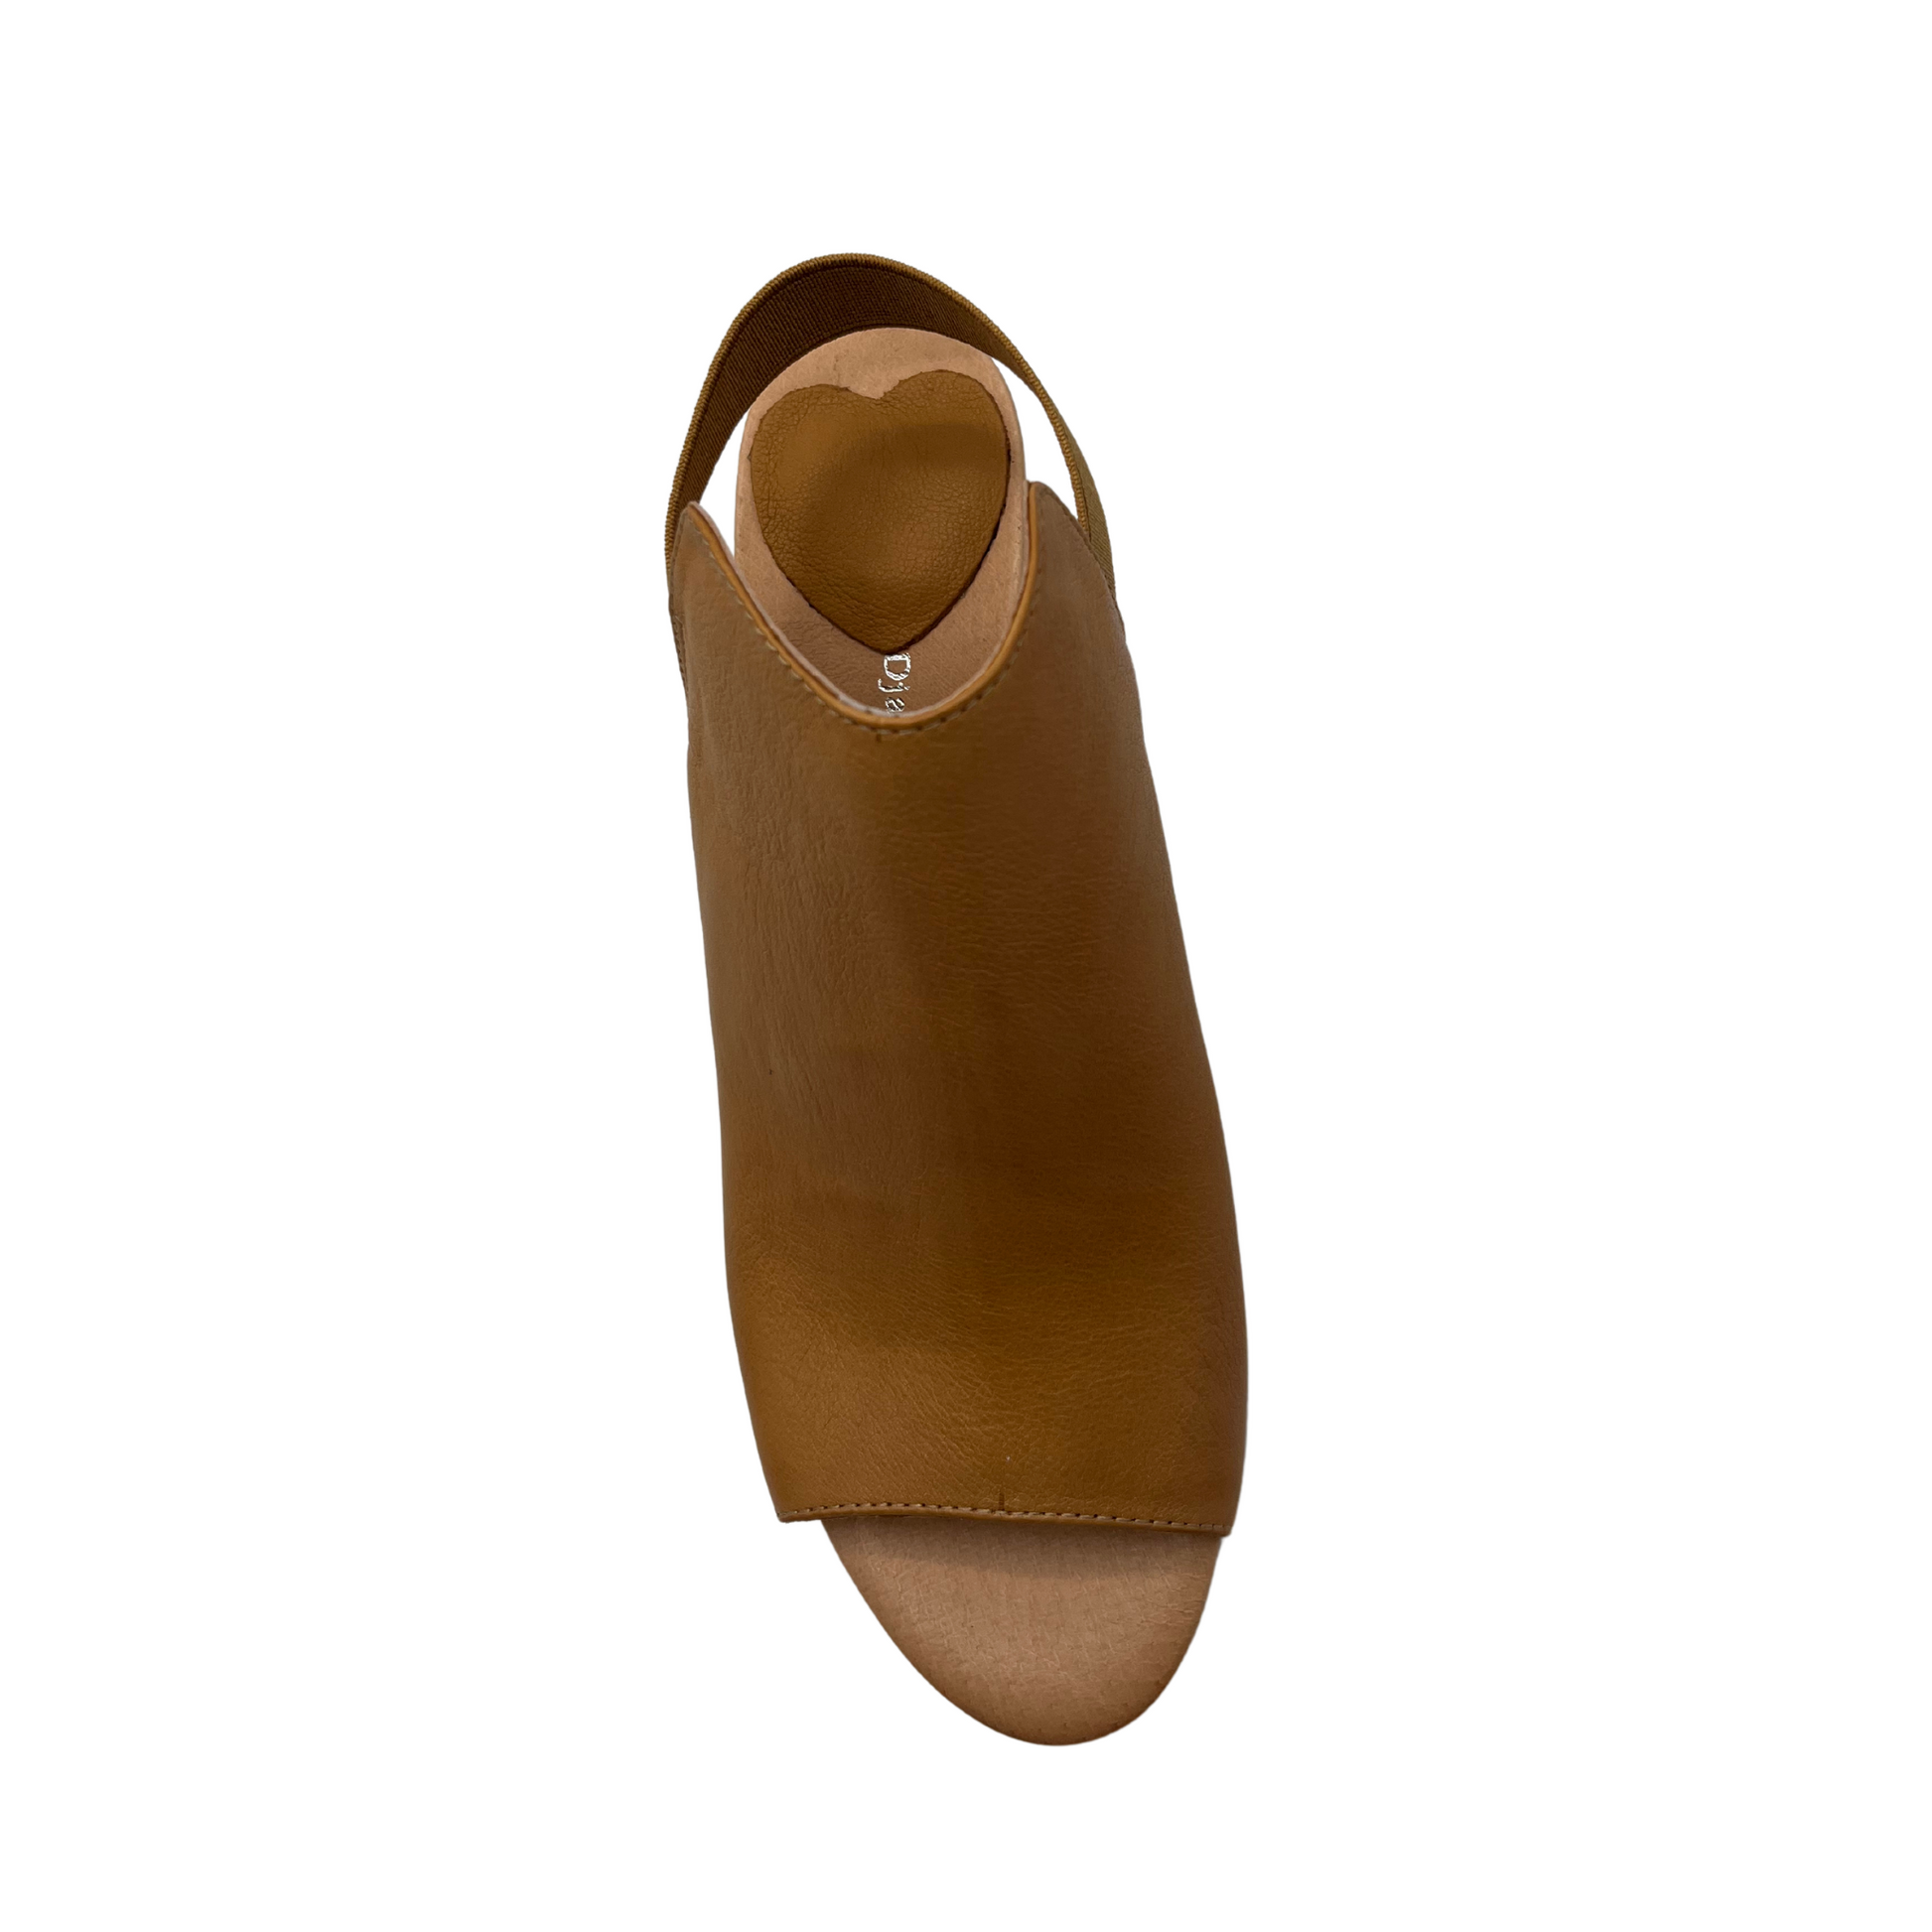 Front view of the leather Sapir shoes with hearted shaped design.